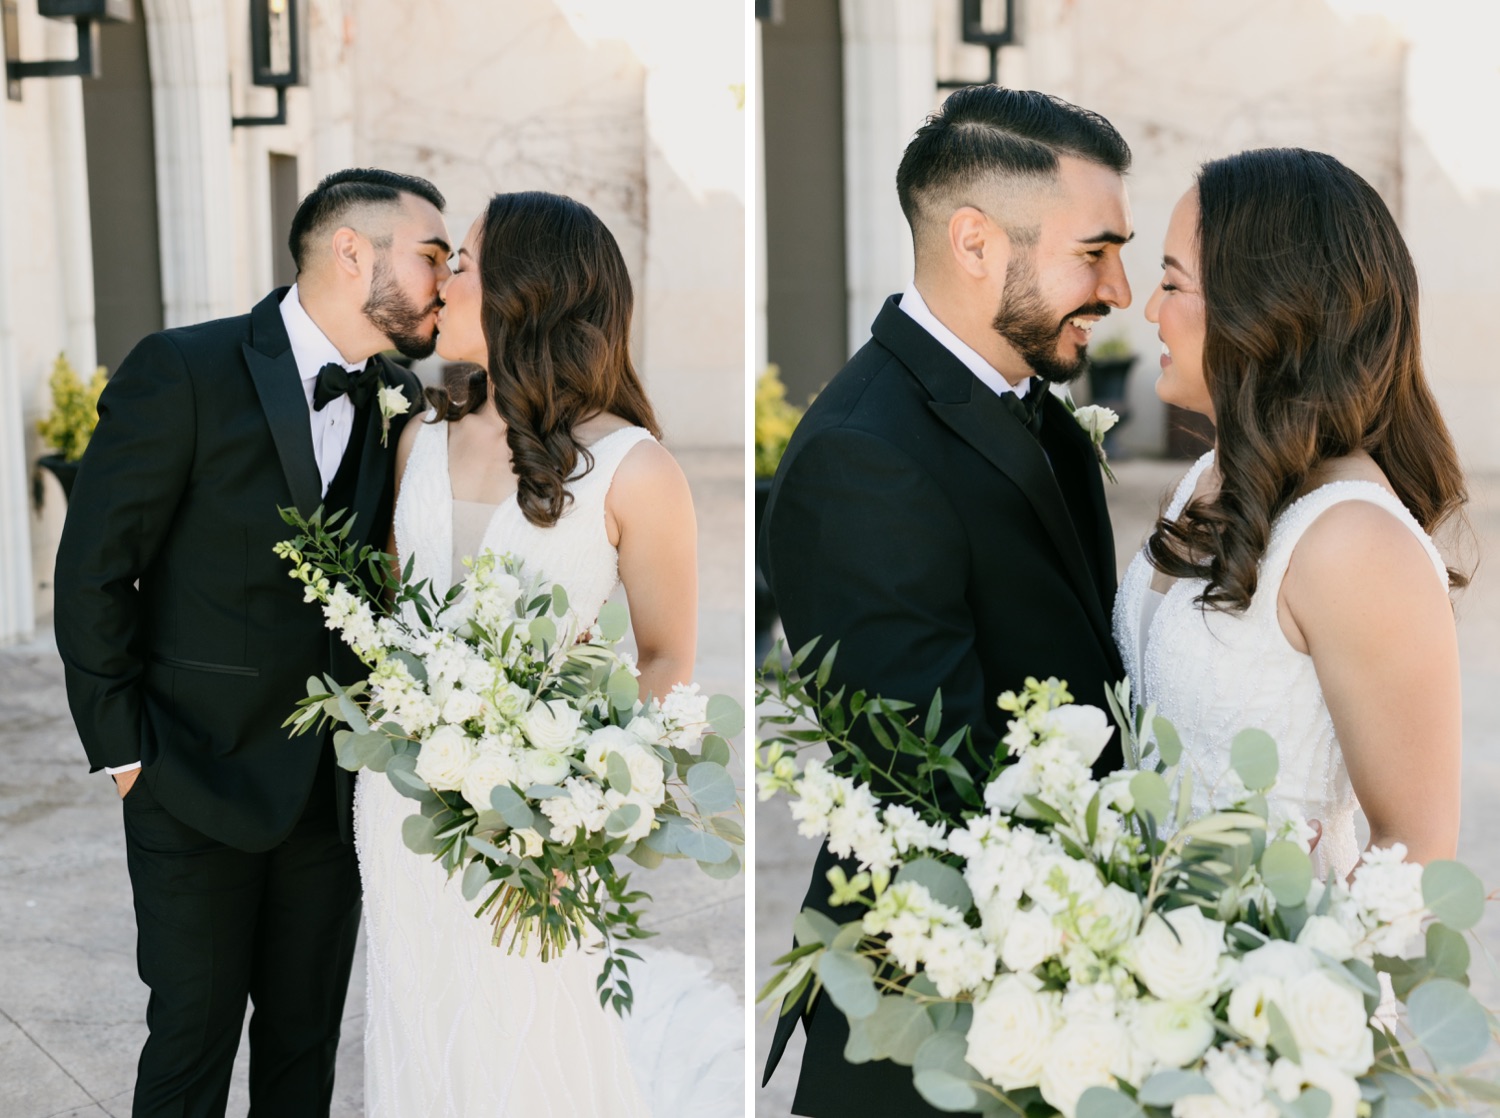 Bride and groom at their first look at tooth and nail winery in Paso robles, California